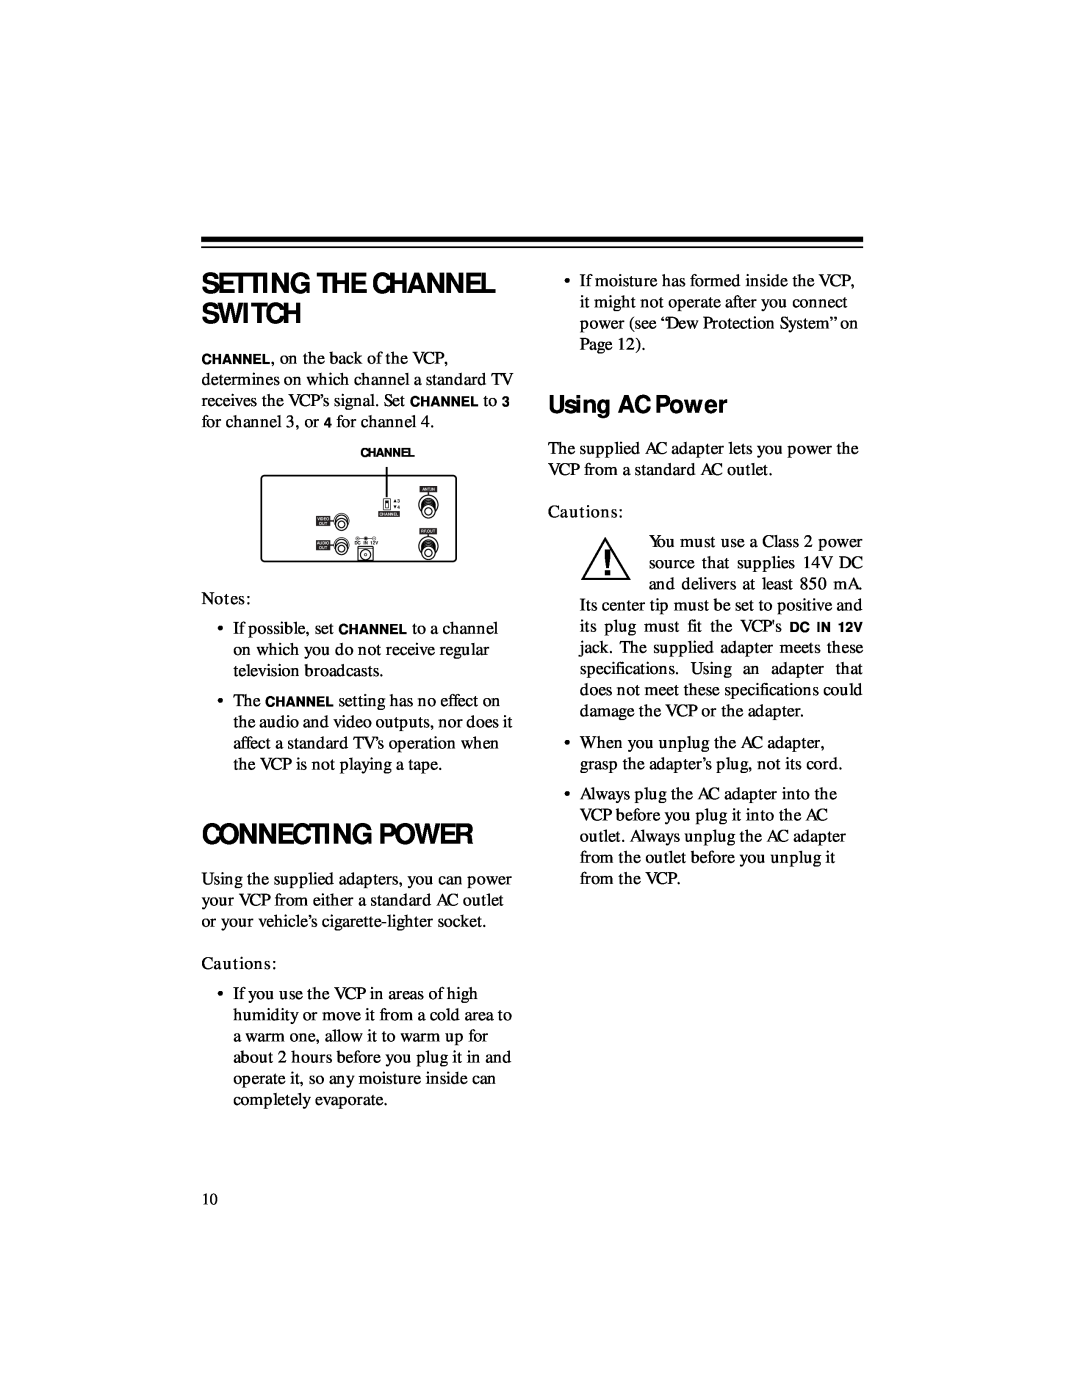 RCA 50, 40 owner manual Setting The Channel Switch, Connecting Power, Using AC Power 